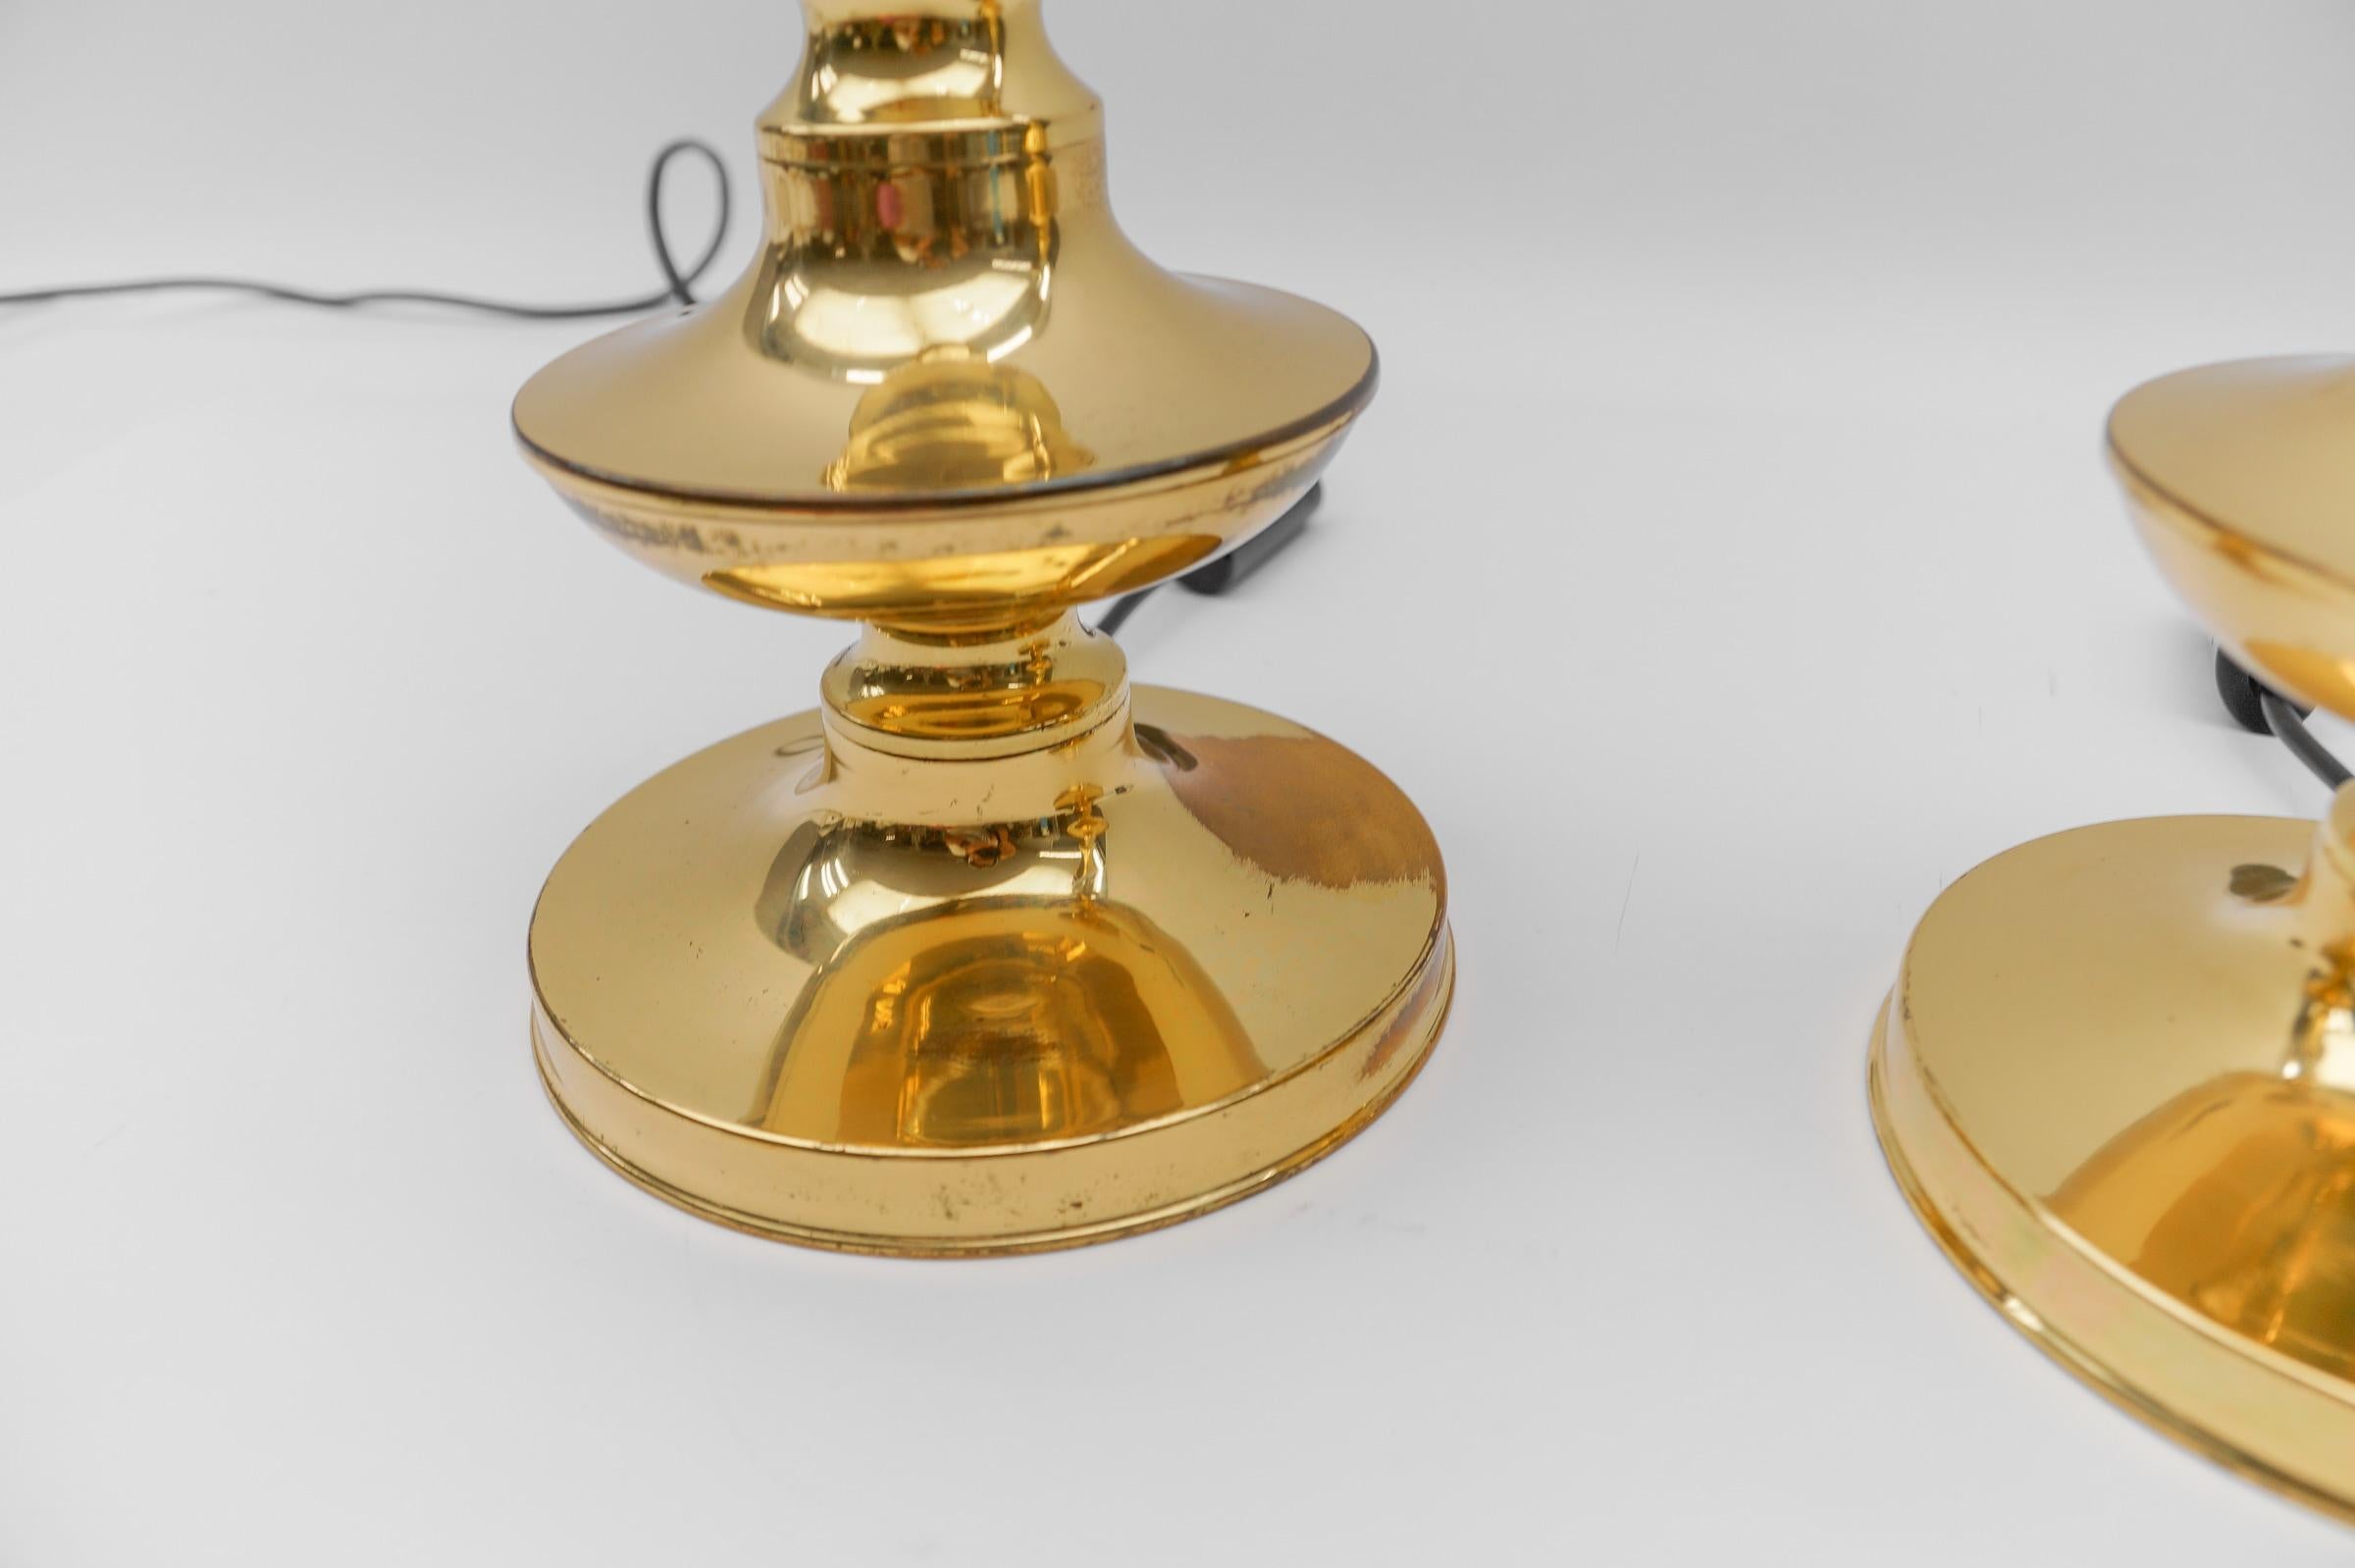 Pair of Mid Century Modern Brass Table Lamp Bases, 1960s For Sale 3